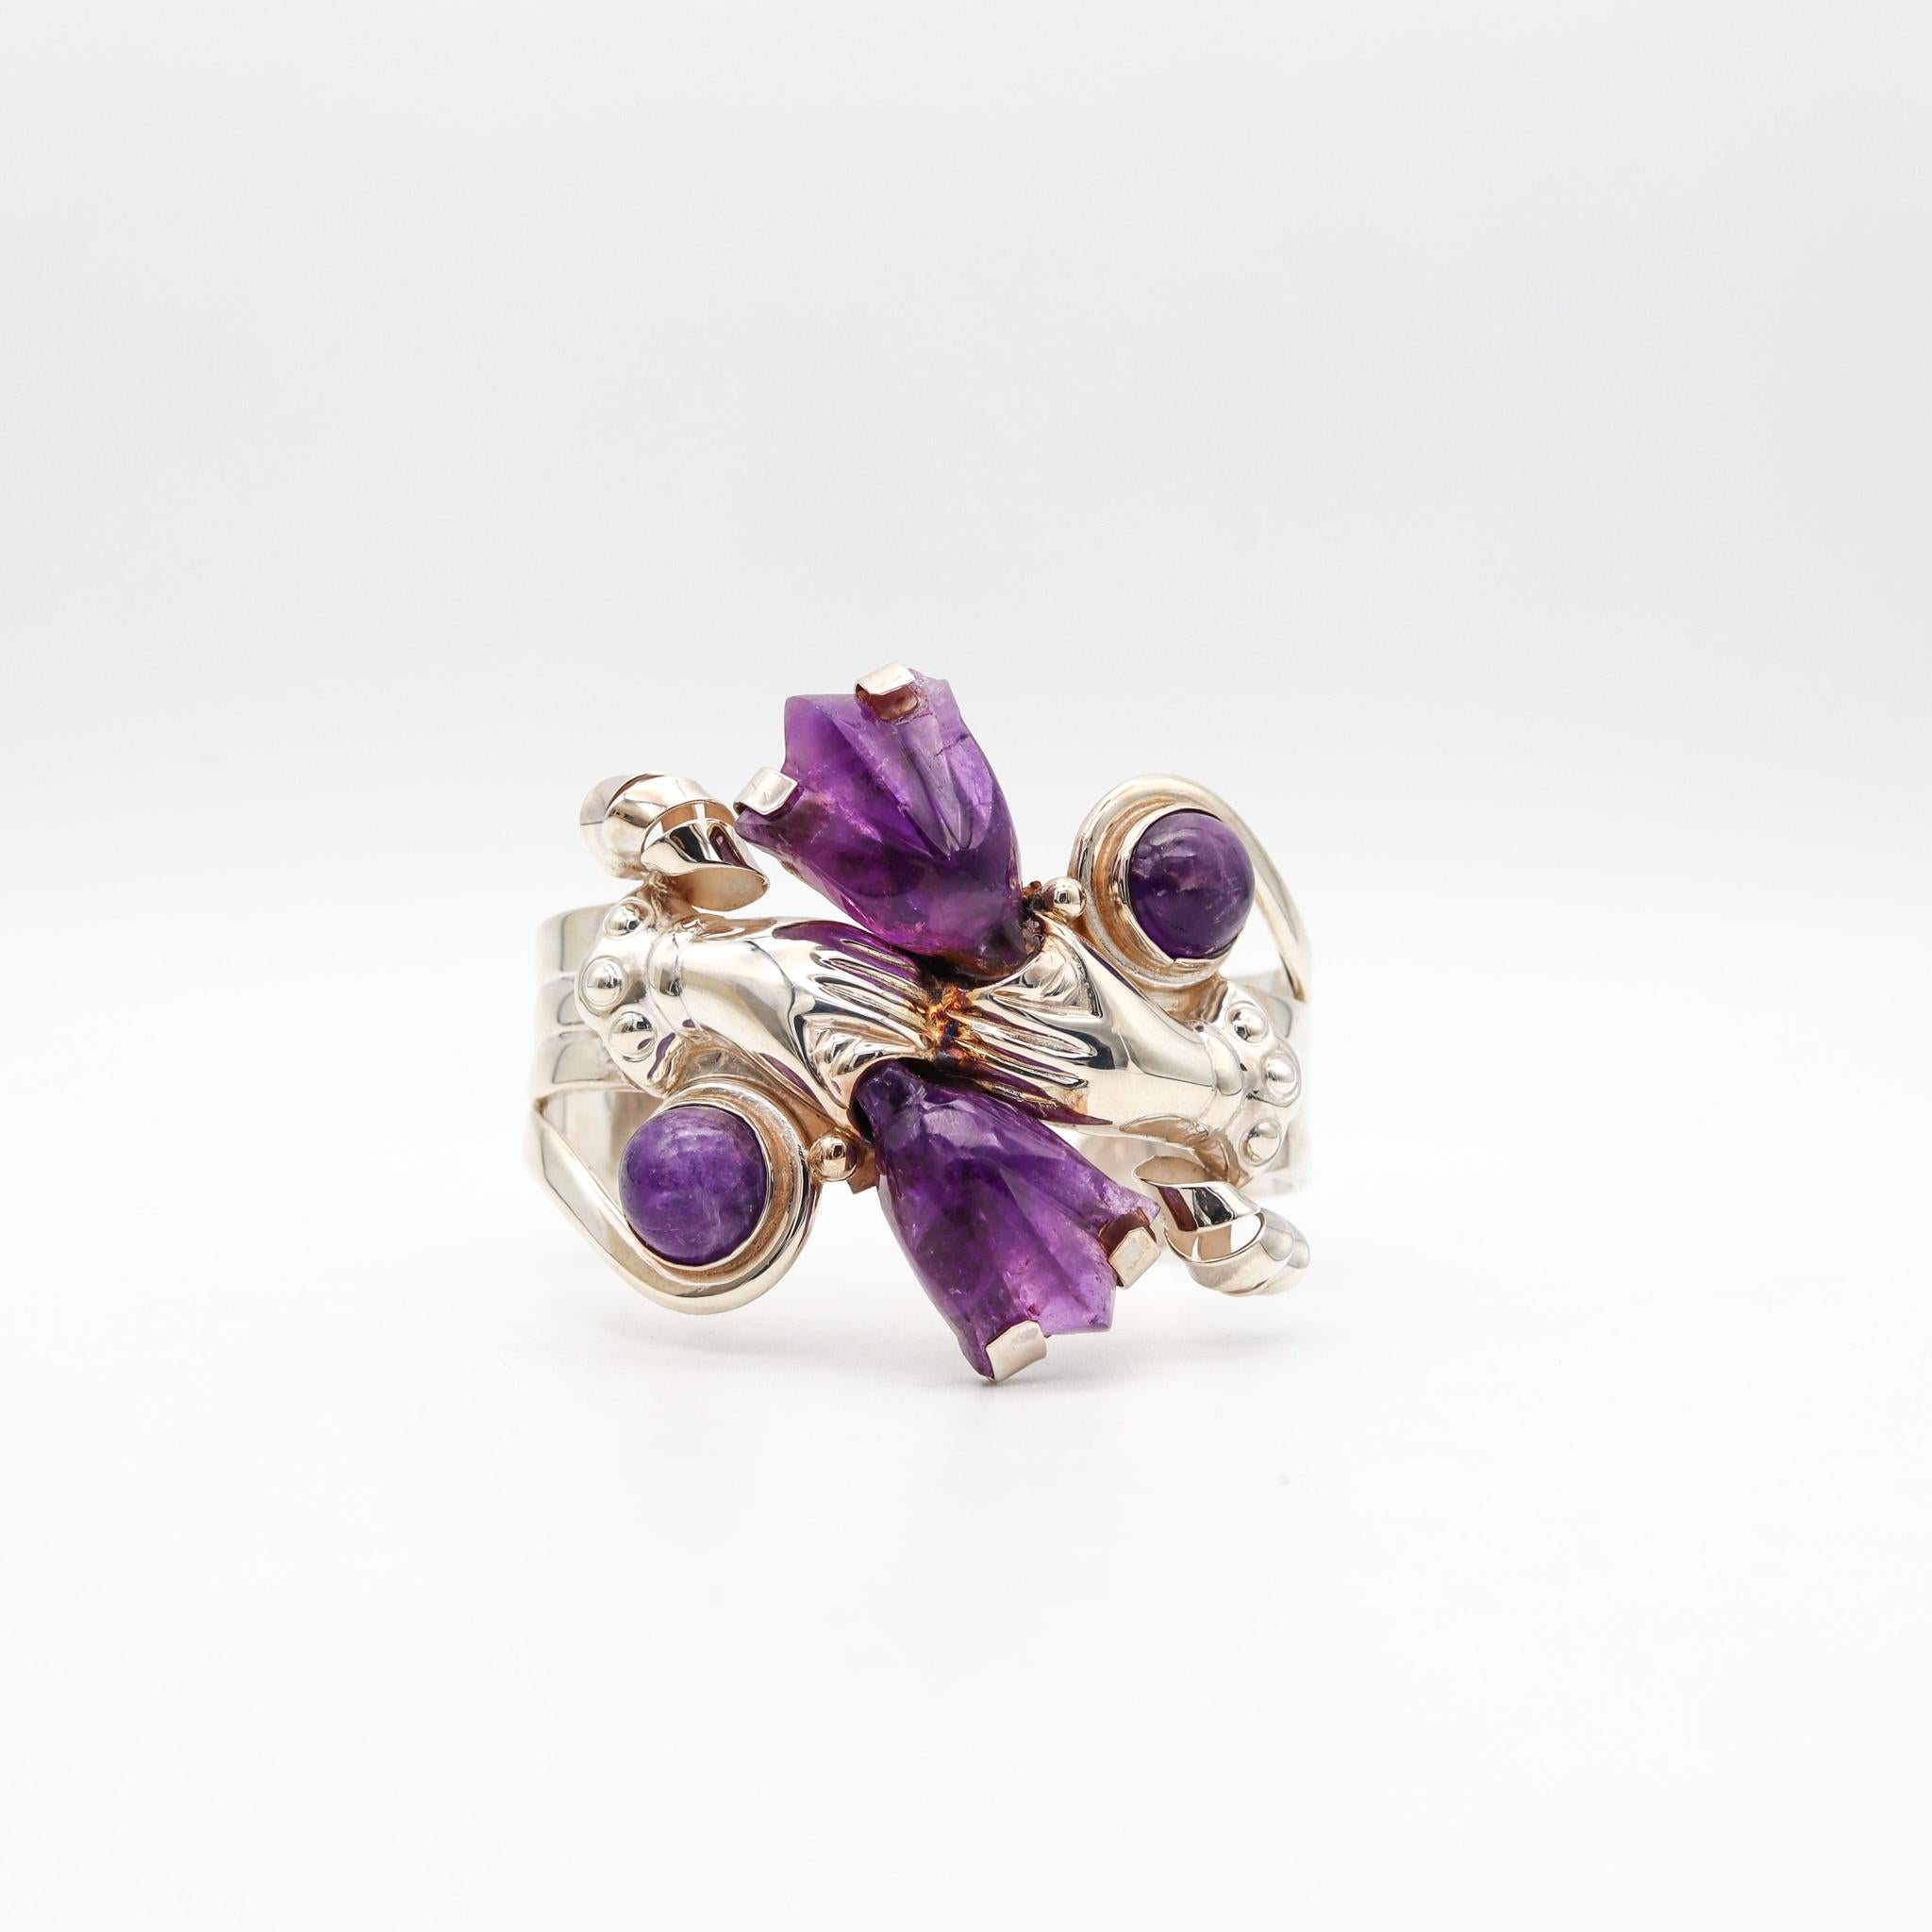 Cuff bracelet made in Taxco.

Beautiful bracelet, created in the silver town of Taxco in Mexico before the 1948. This statement cuff has been crafted in solid .925/.999 sterling silver with organic designs and mount with very nice carved amethysts.